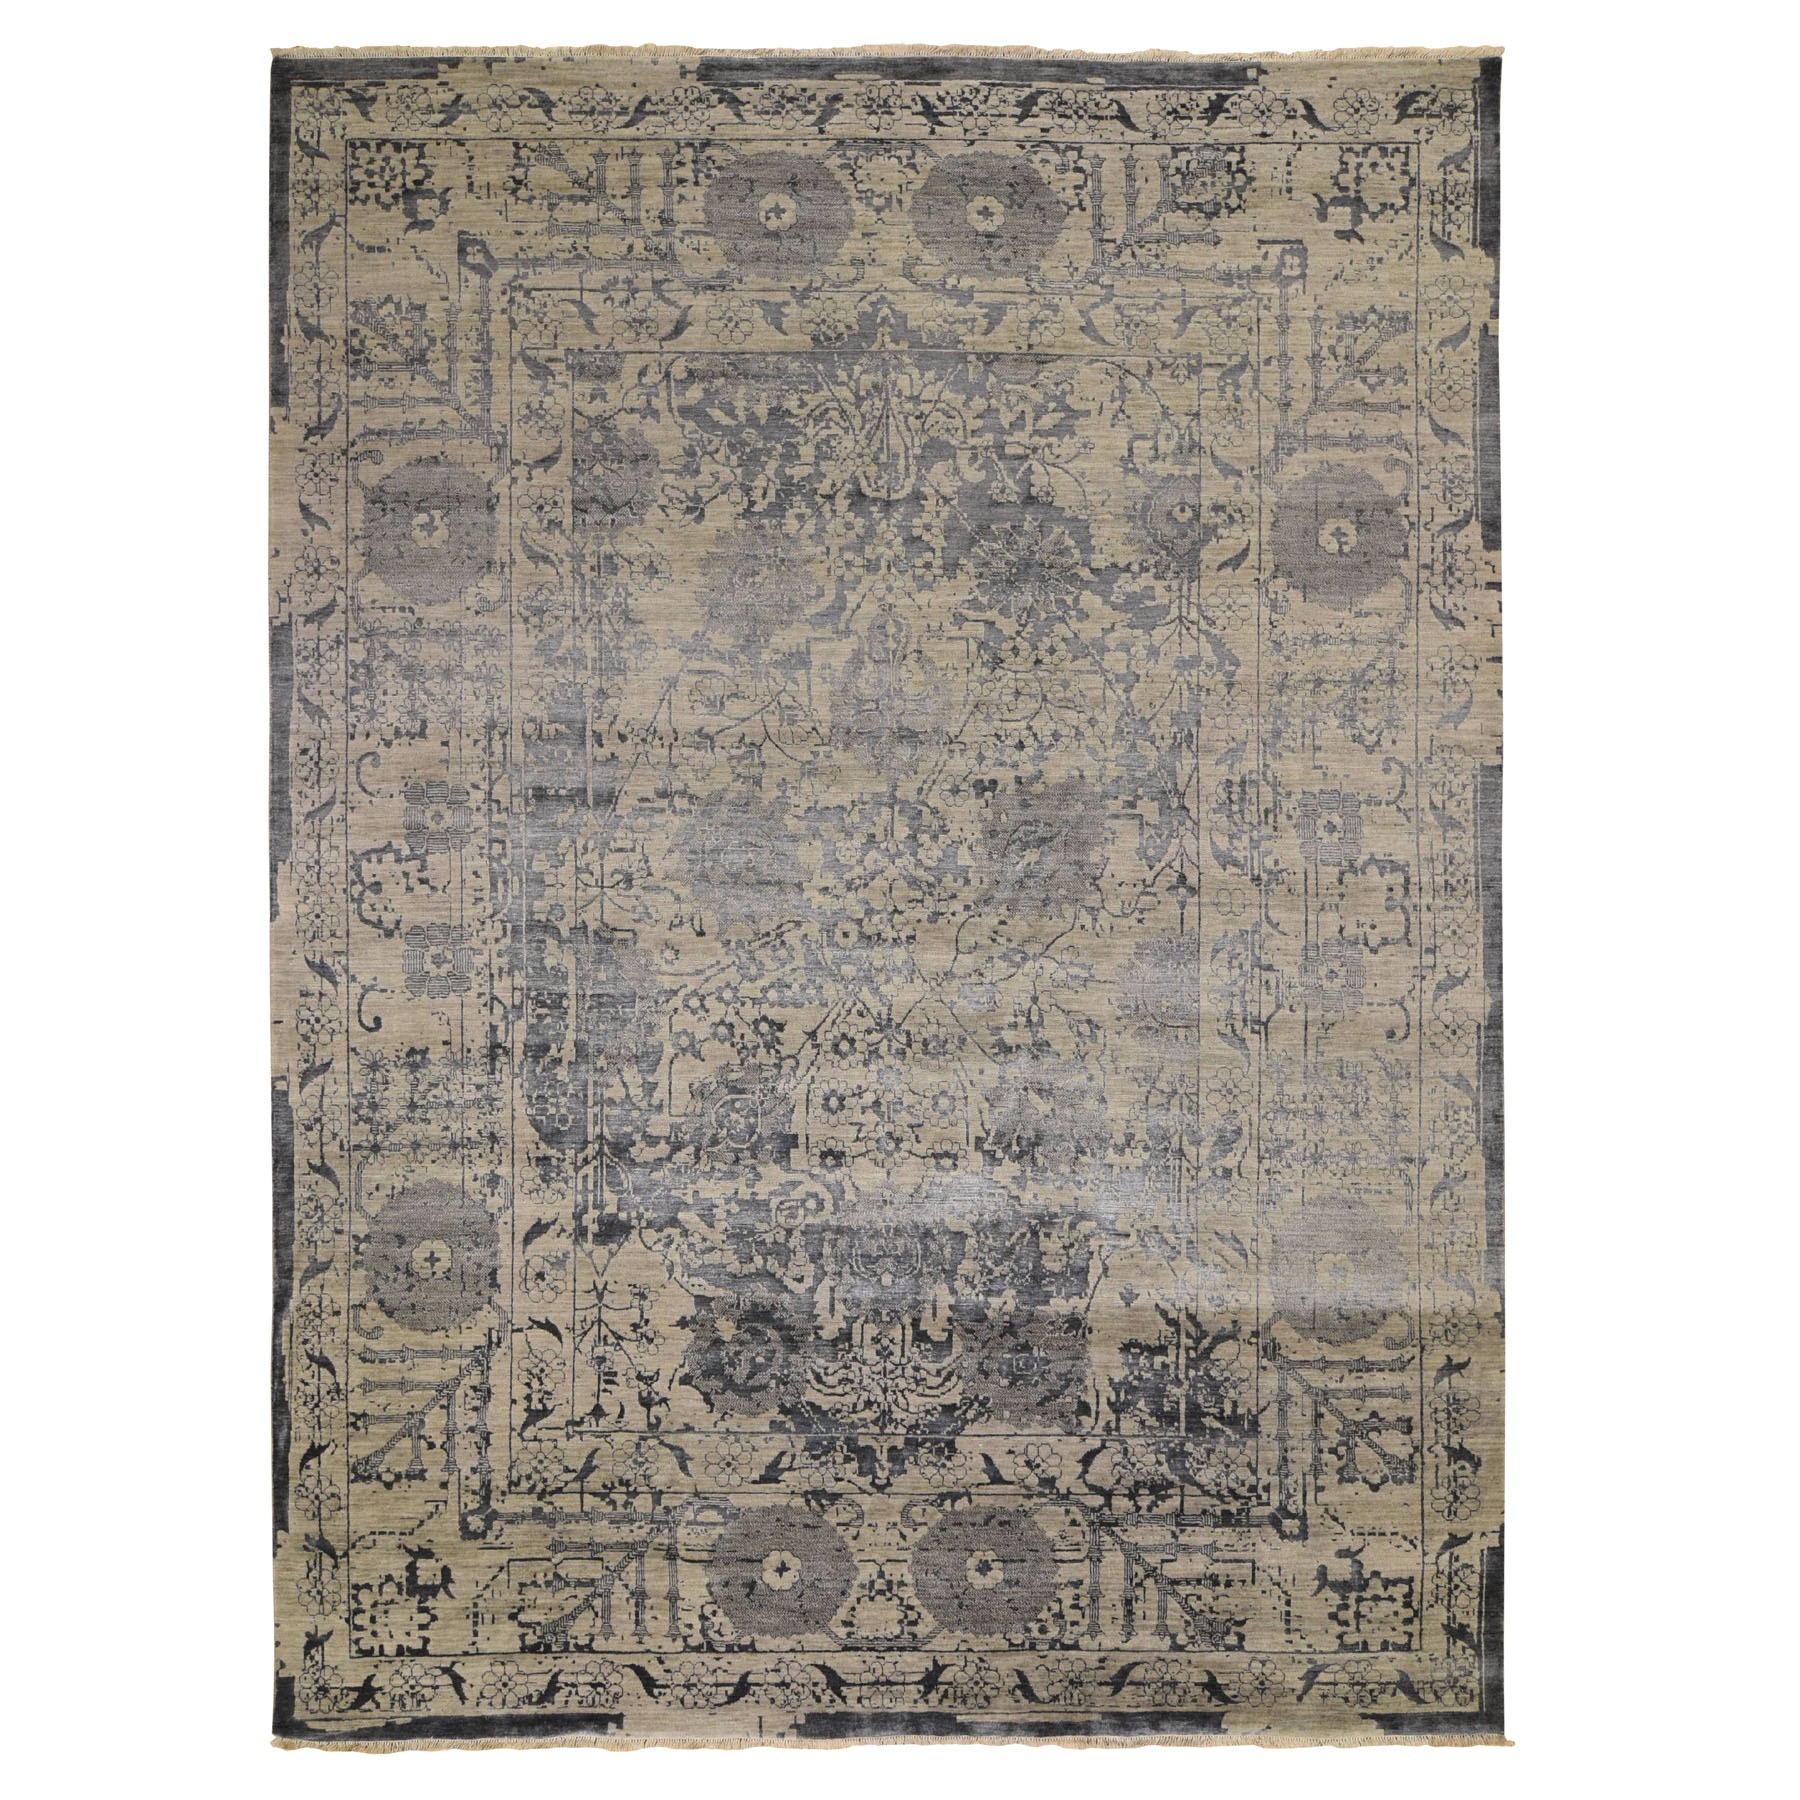 9'1"x12' Gray Wool And Silk Transitional Erased Persian Design Hand Woven Oriental Rug 